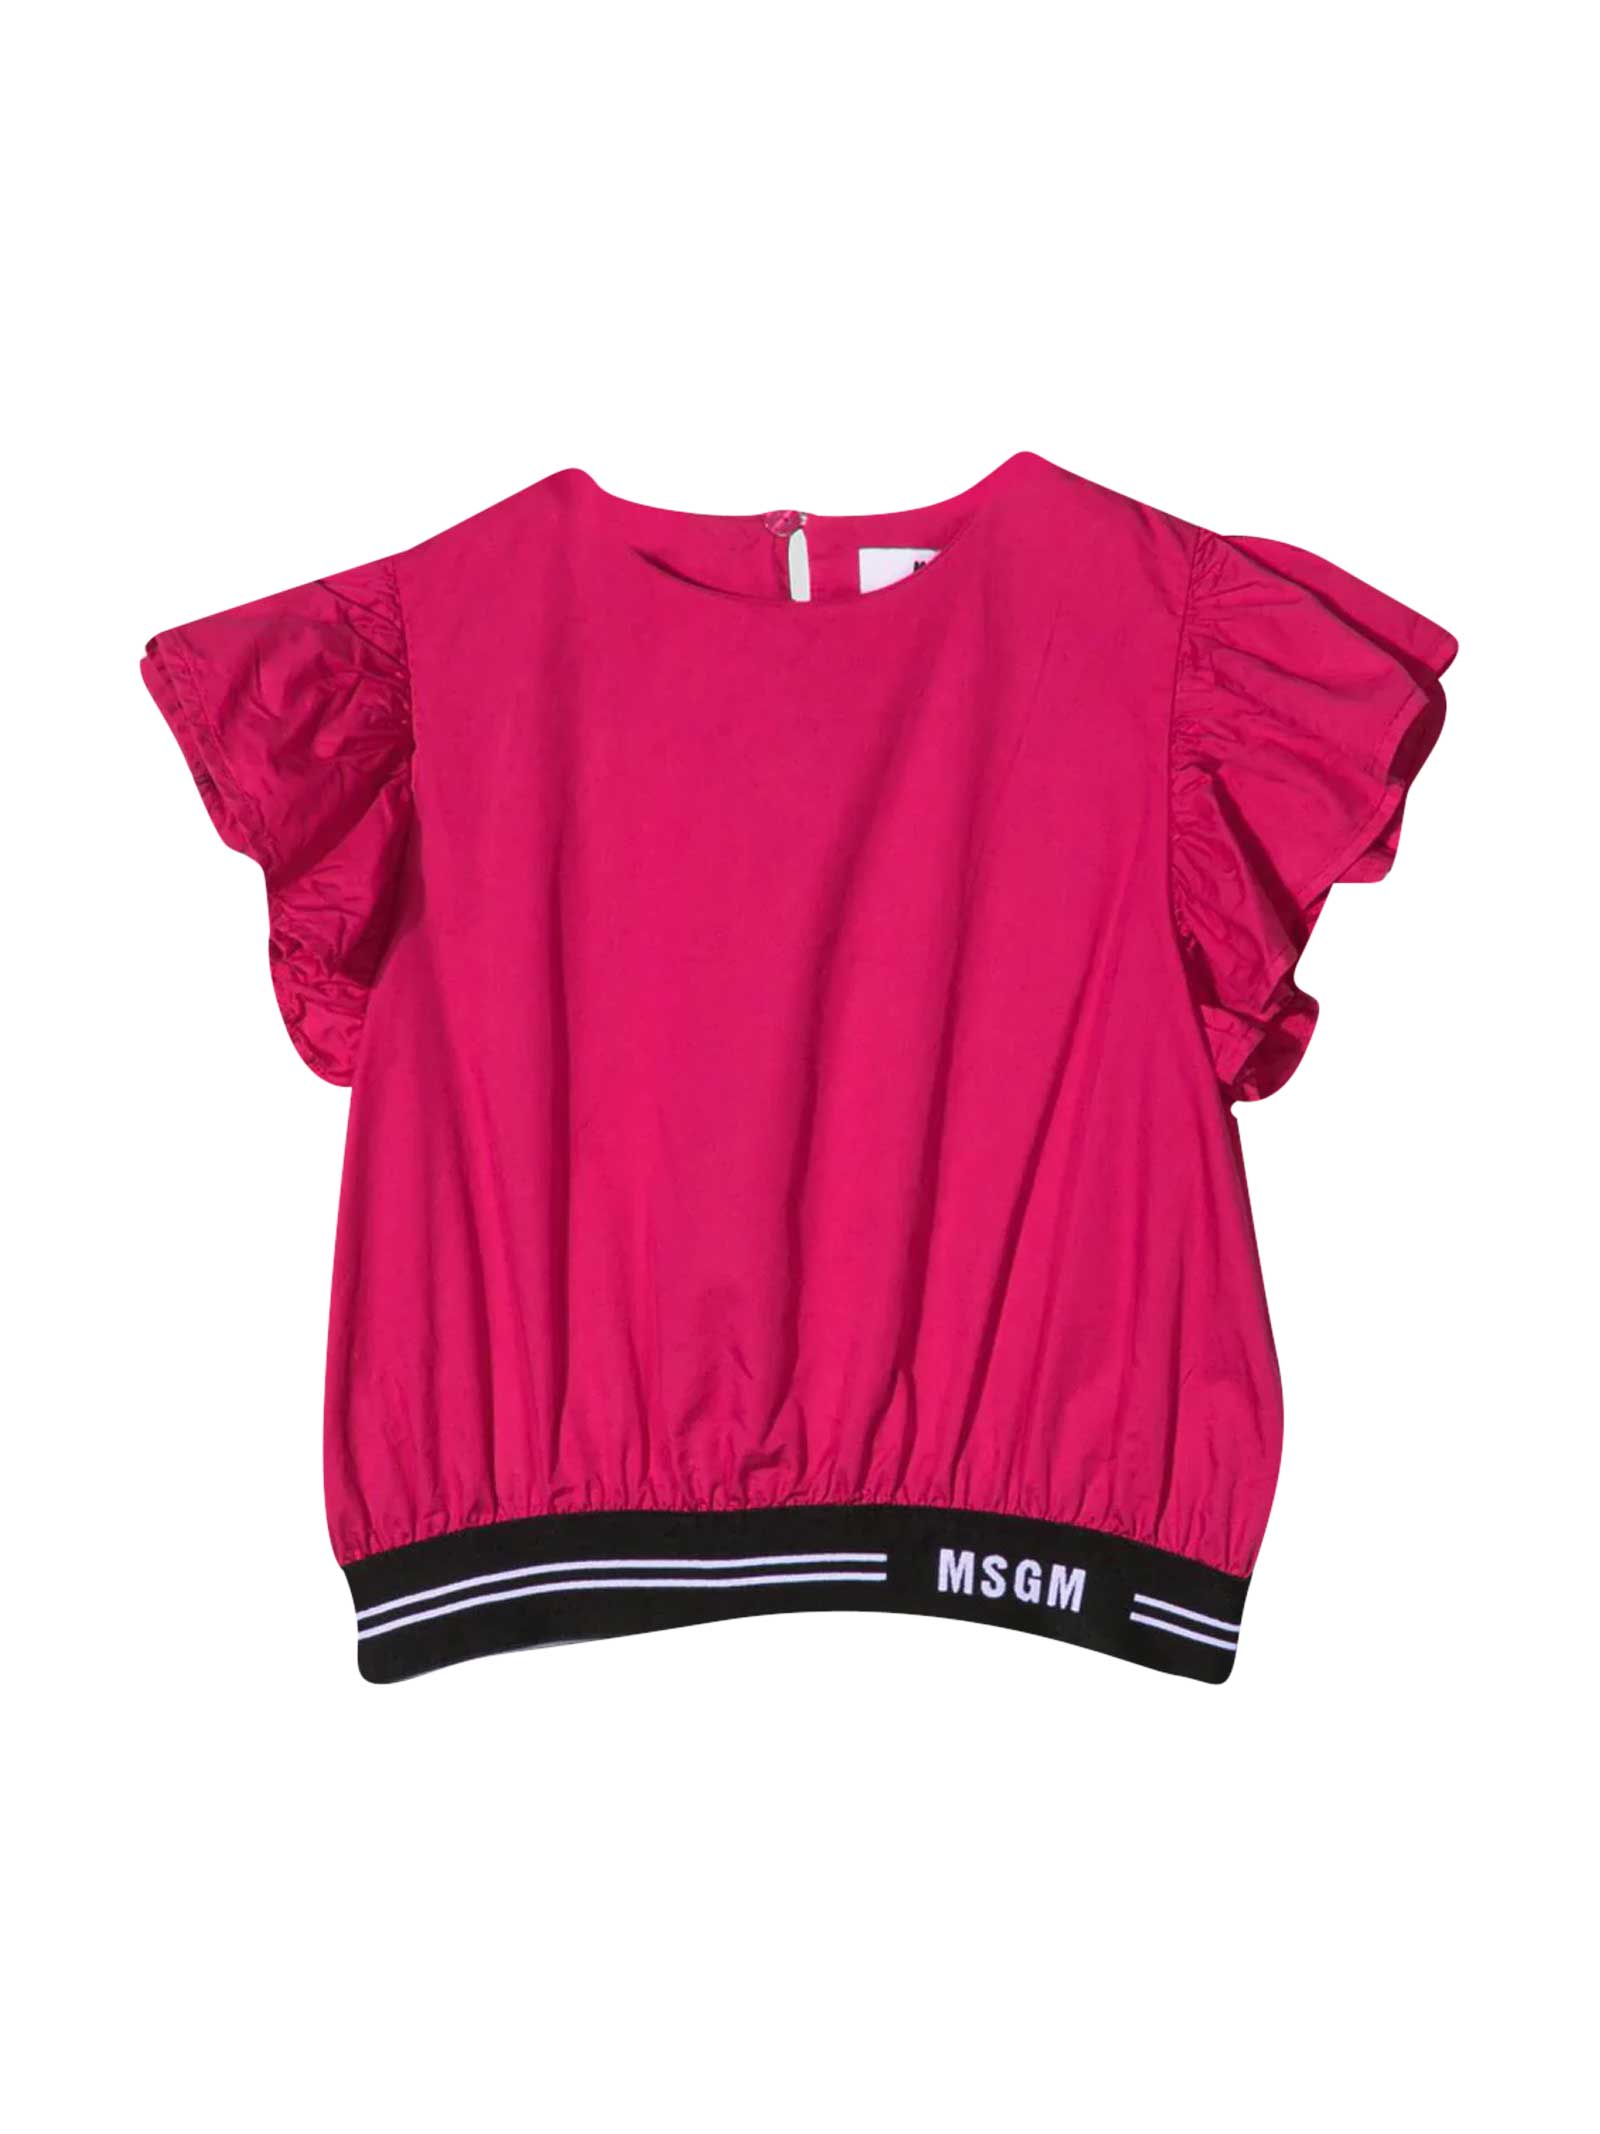 MSGM FUCHSIA TEEN BLOUSE WITH BLACK LOGOED BAND,MS026885 135T